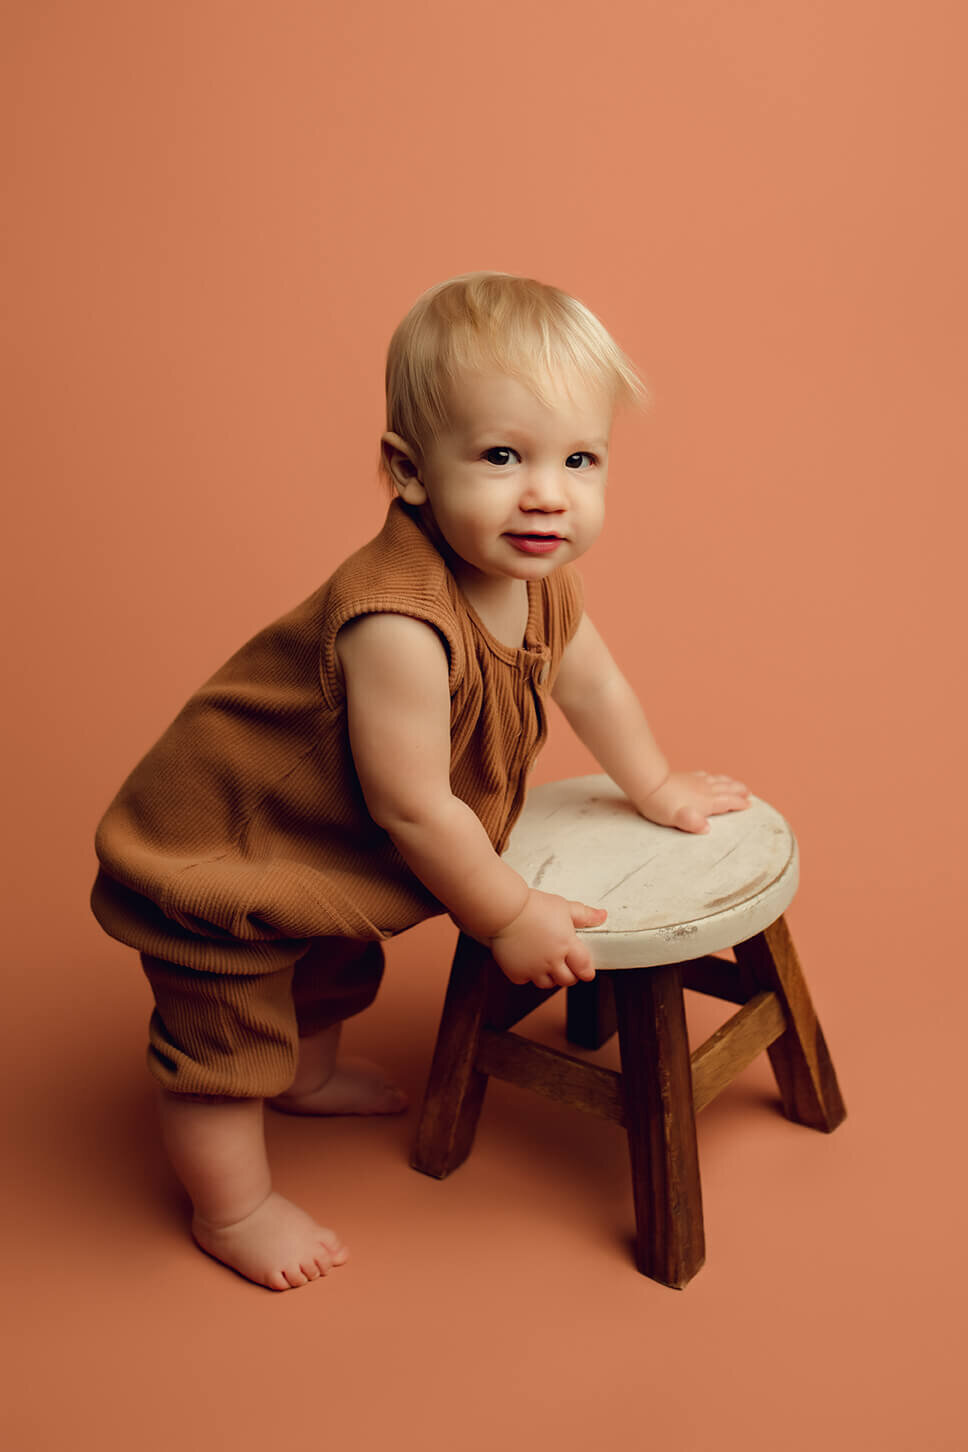 a one year old boy standing on a brown drop wearing a brown outfit holding a brown and white stool